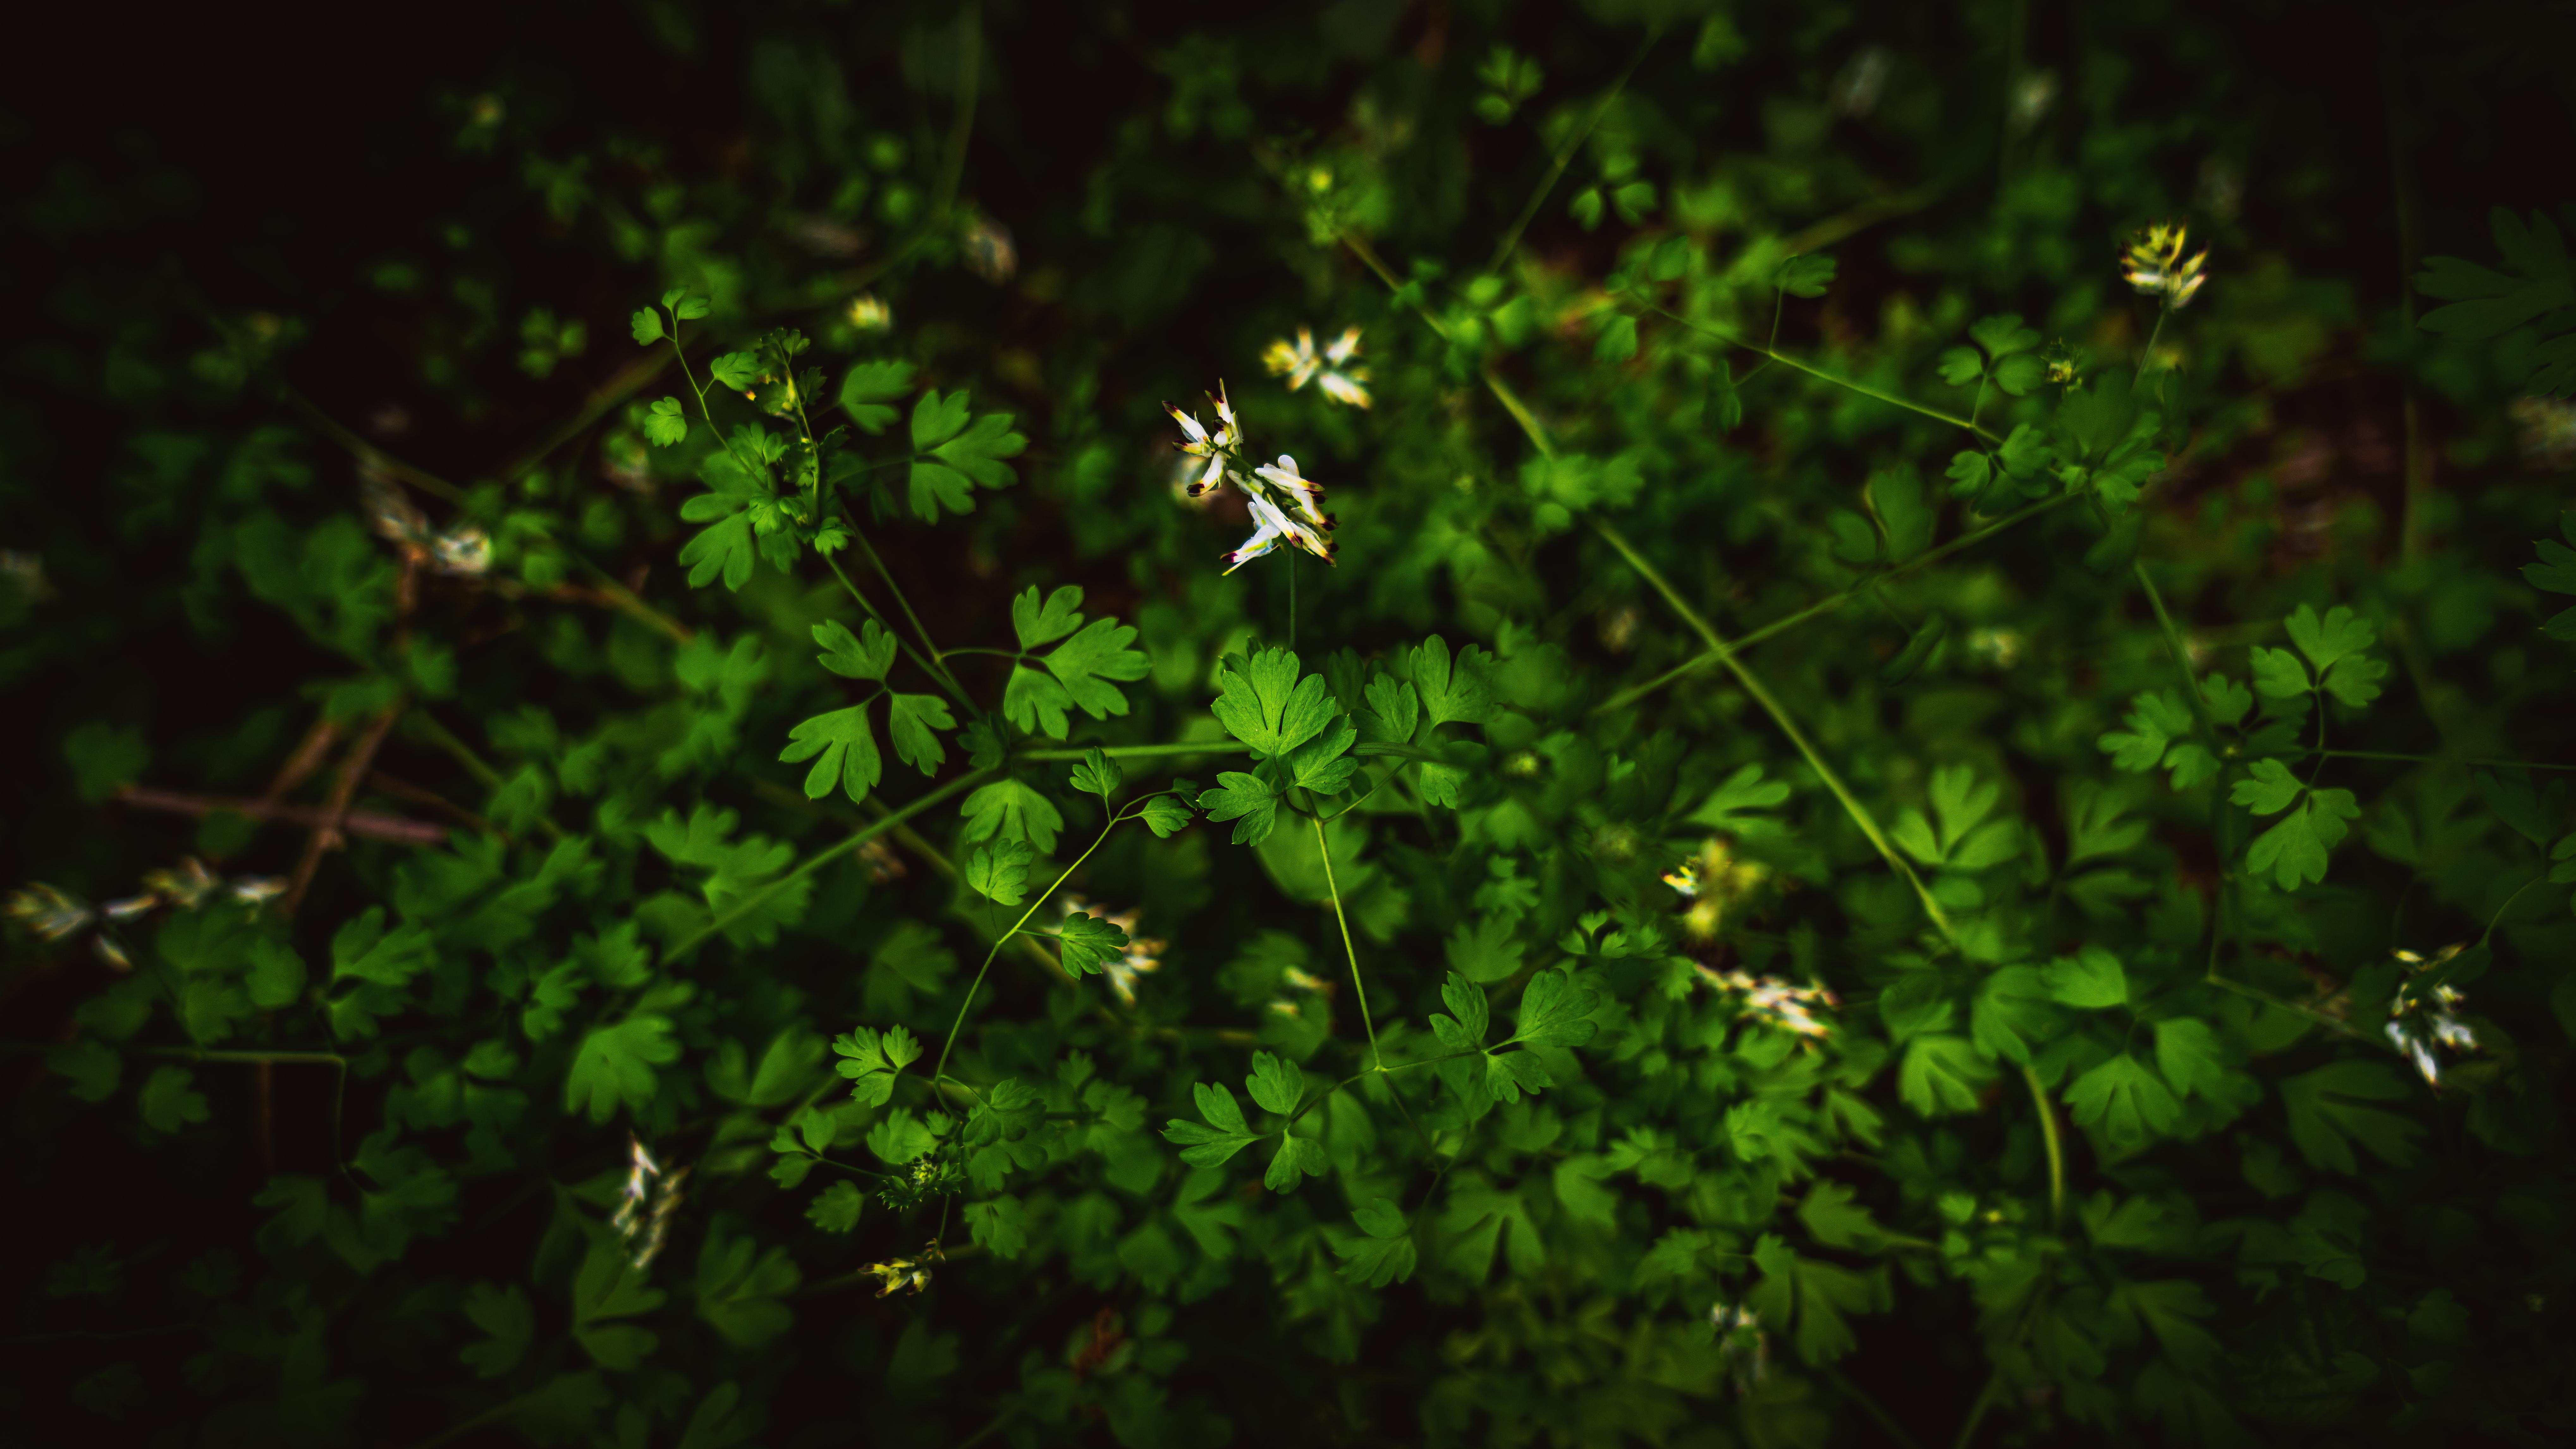 Plants 4K wallpaper for your desktop or mobile screen free and easy to download